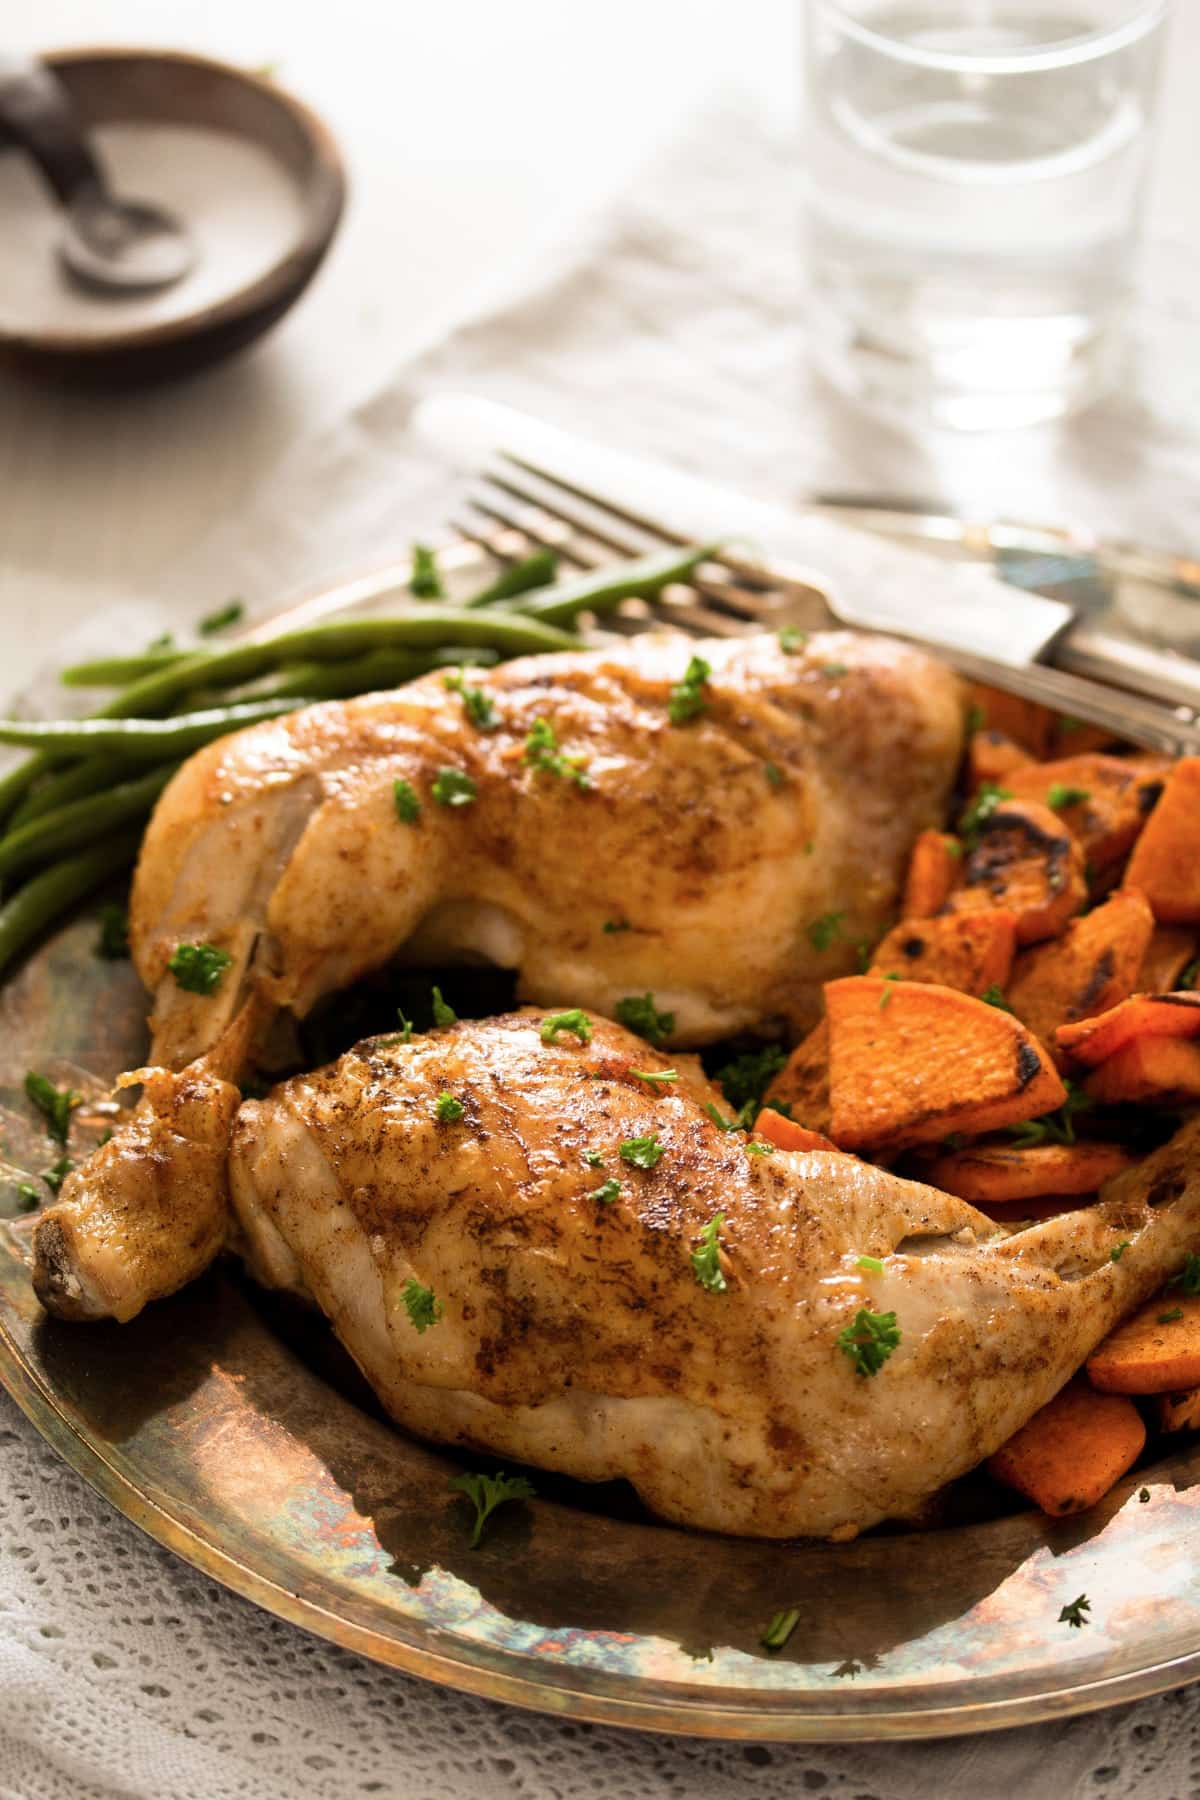 plate with two chicken quarters baked in the oven, sweet potatoes and green beans.